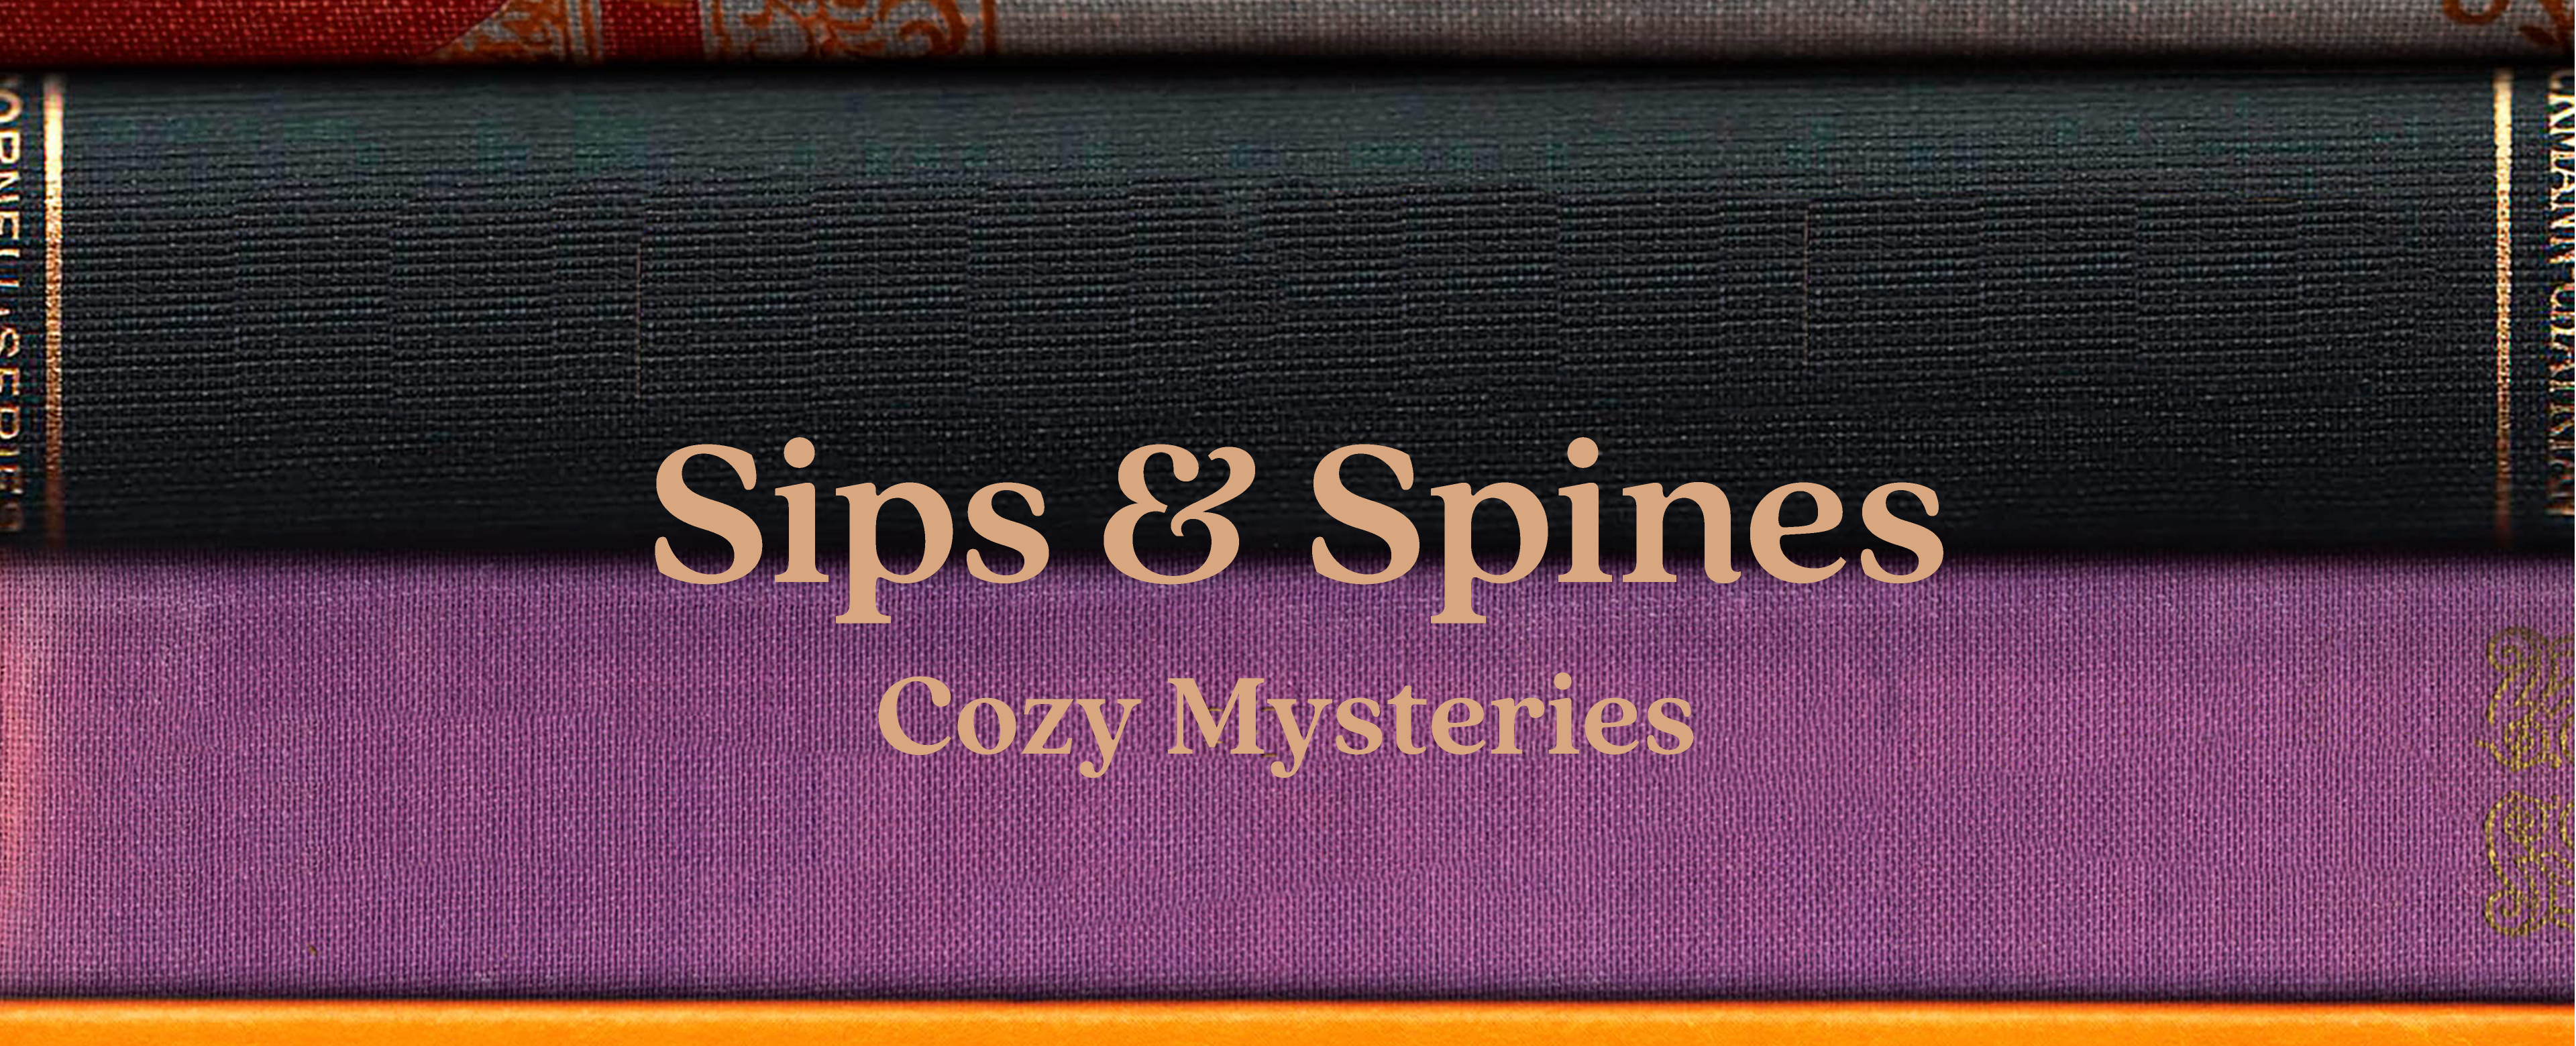 Book spines overlaid with the text "Sips & Spines: Cozy Mysteries)"